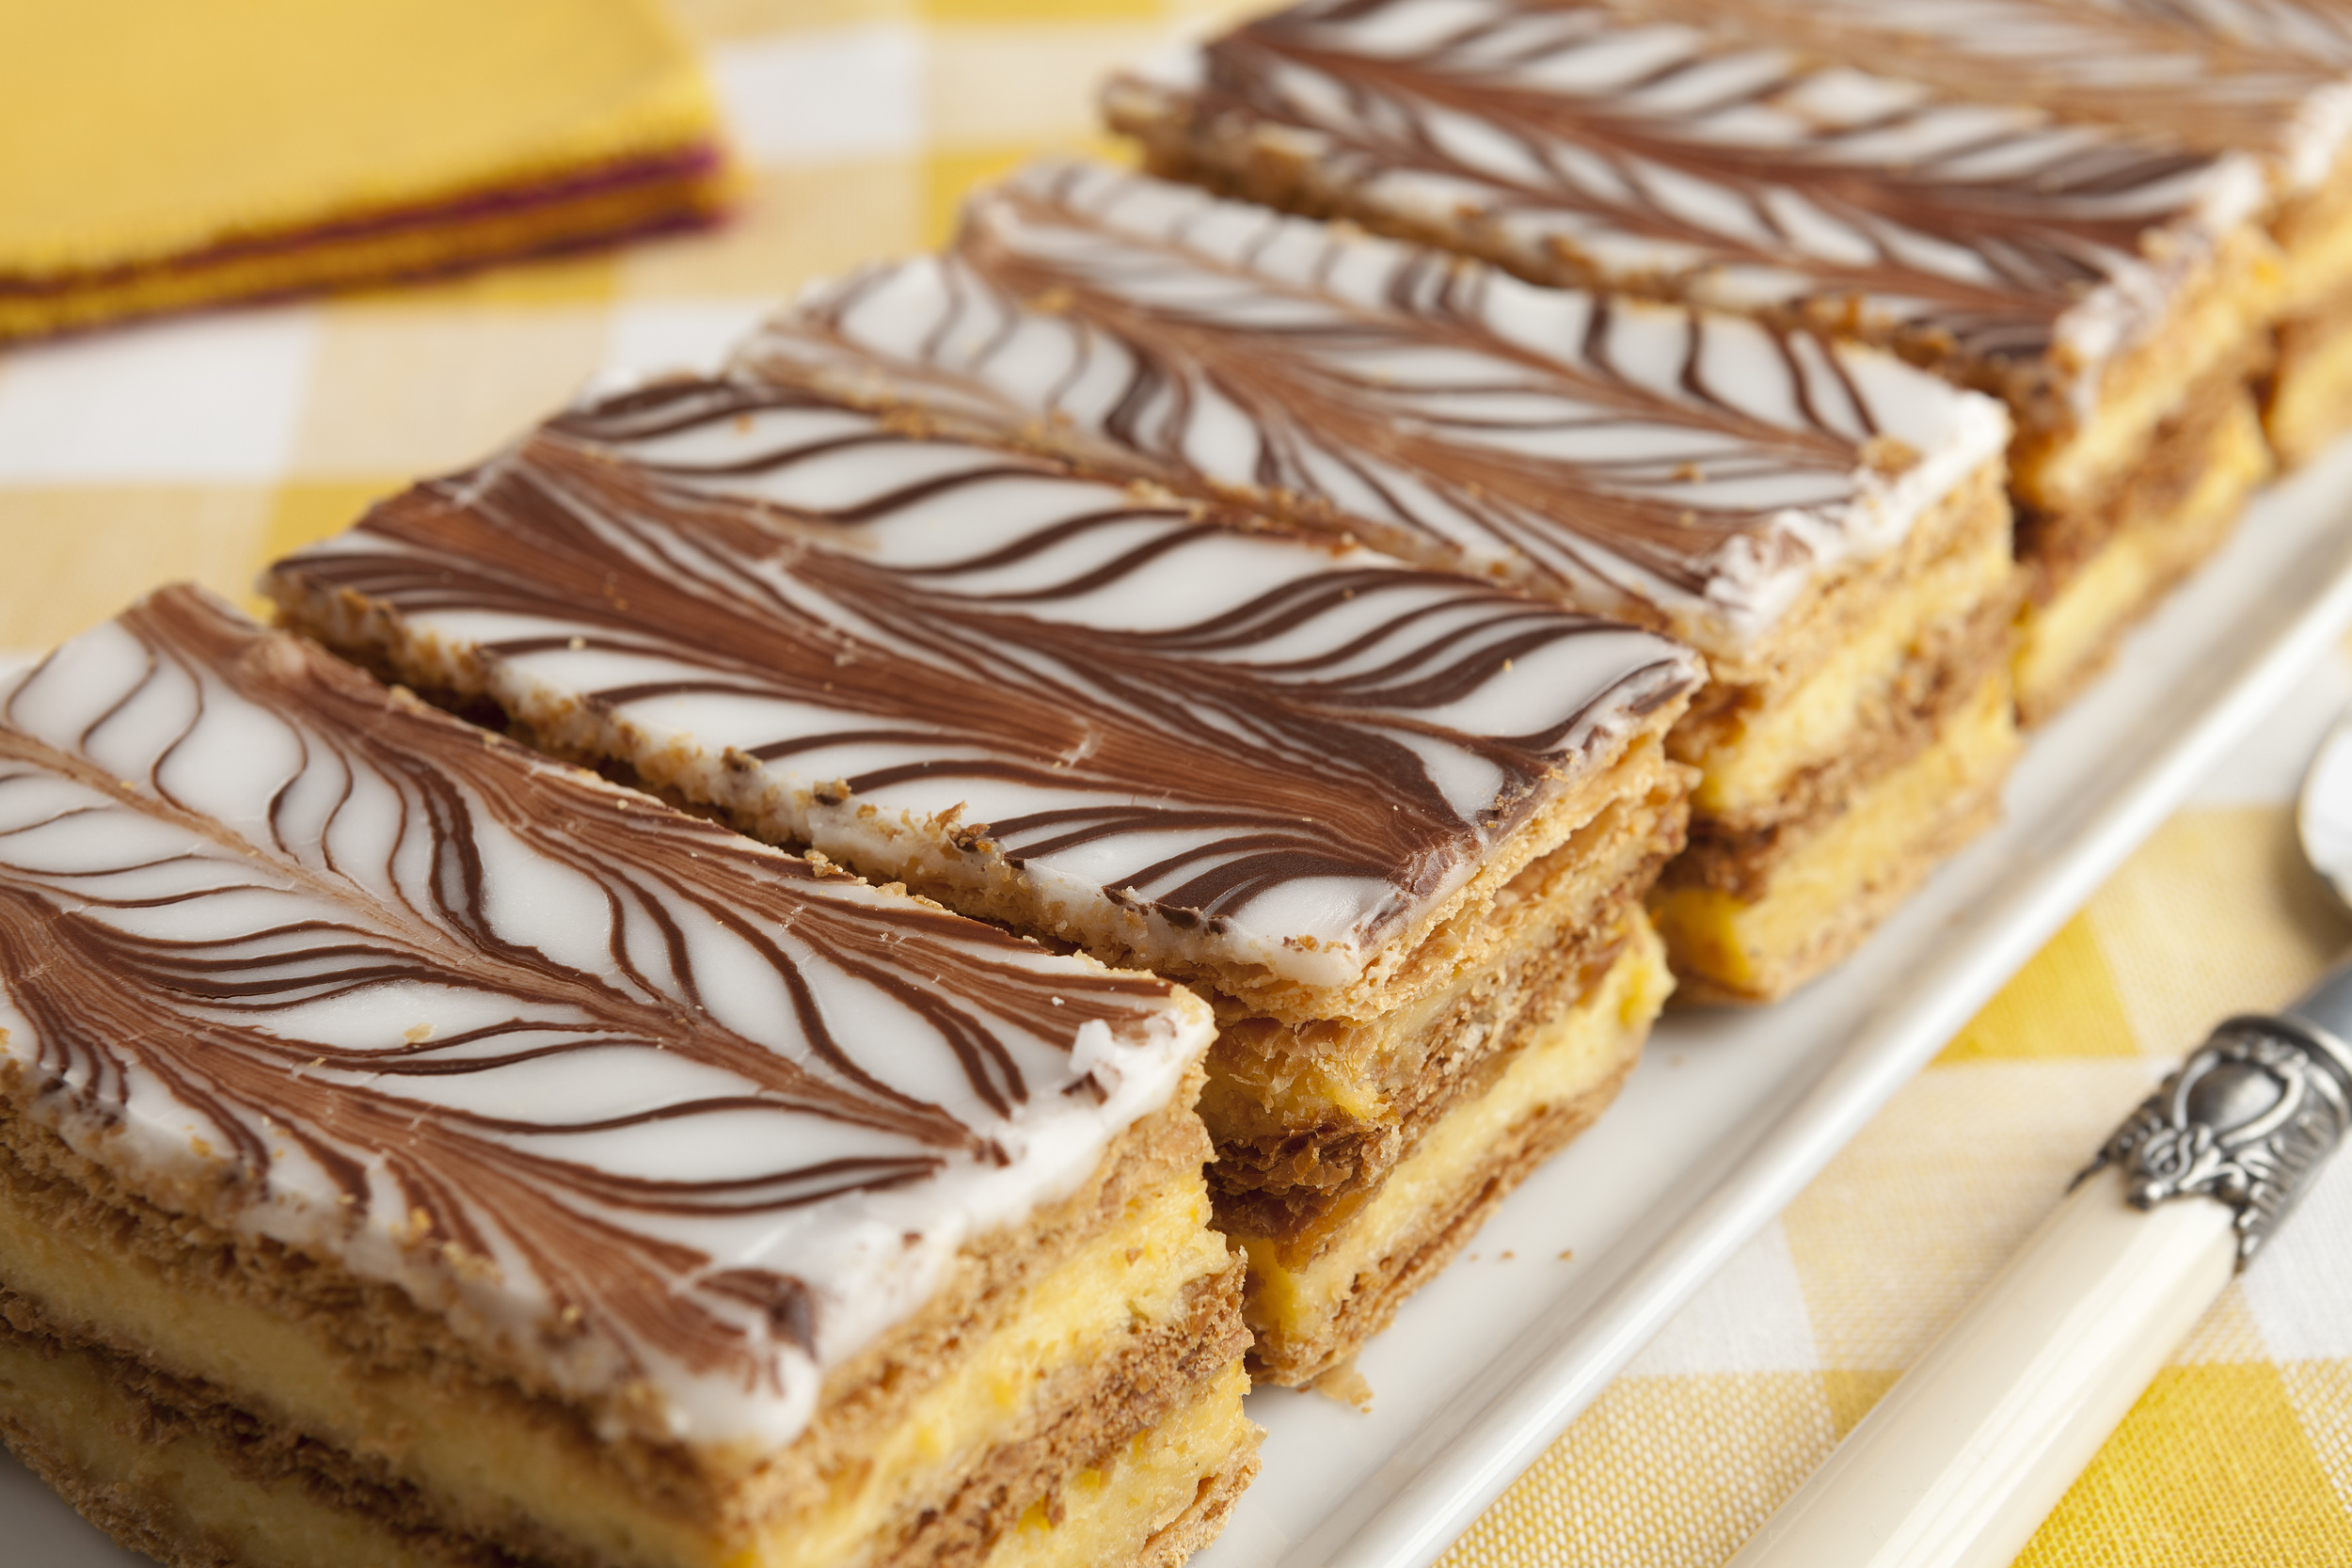 <p><em>Mille-feuille</em> (or "thousand sheets") looks as fancy as it sounds but you don’t have to be a French pastry chef in order to make it. <a href="https://preppykitchen.com/mille-feuille/"><span>This recipe from Preppy Kitchen</span></a> will walk you through making the cream, the flaky layers, the glaze, and assembling the entire thing.</p><p>You may also like: <a href='https://www.yardbarker.com/lifestyle/articles/10_beautifully_scenic_walks_in_sydney/s1__38346409'>10 beautifully scenic walks in Sydney</a></p>